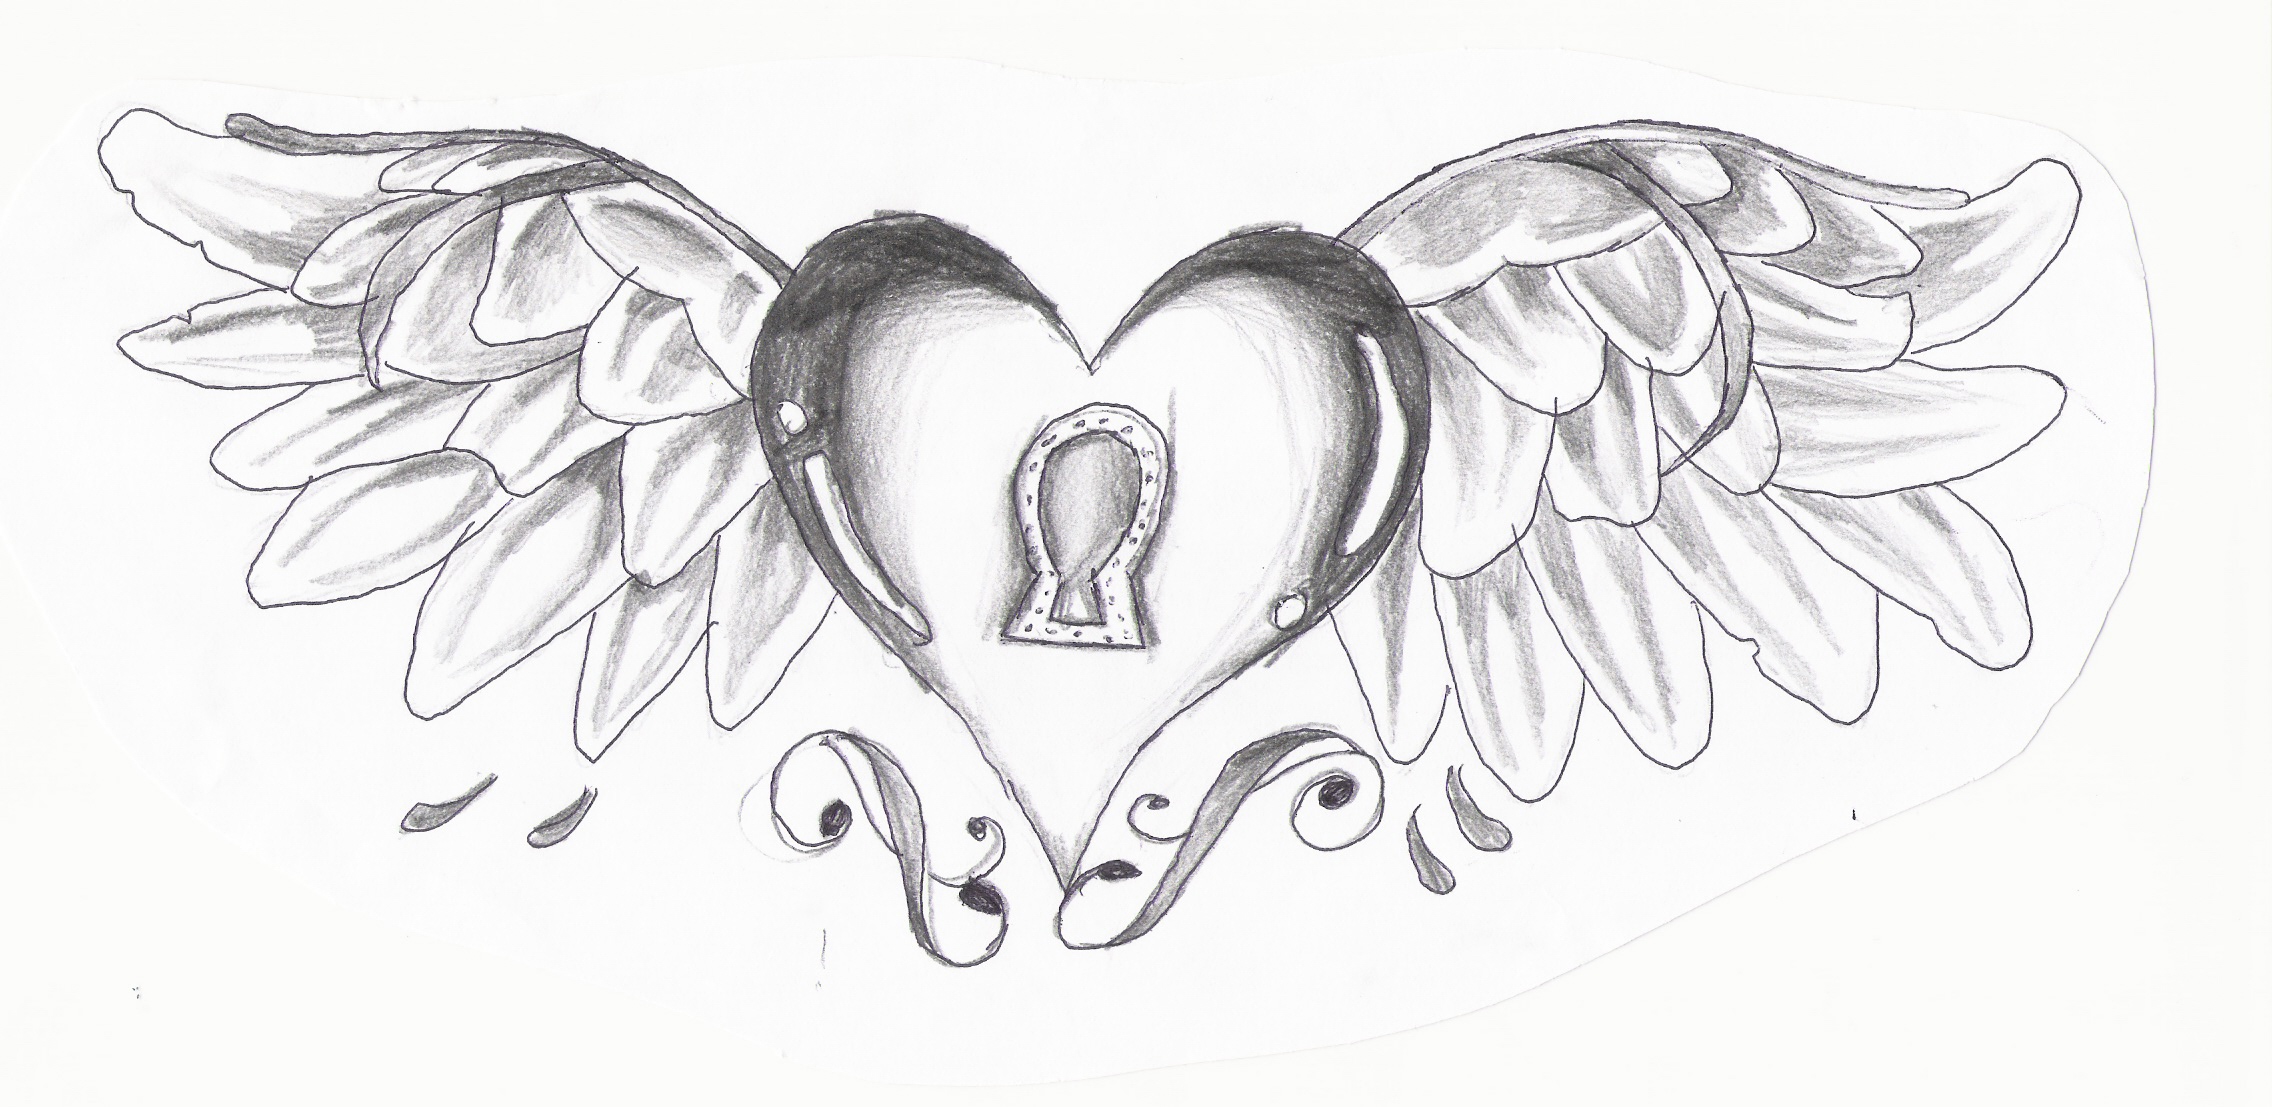 Free Roses Drawings With Hearts, Download Free Roses Drawings With